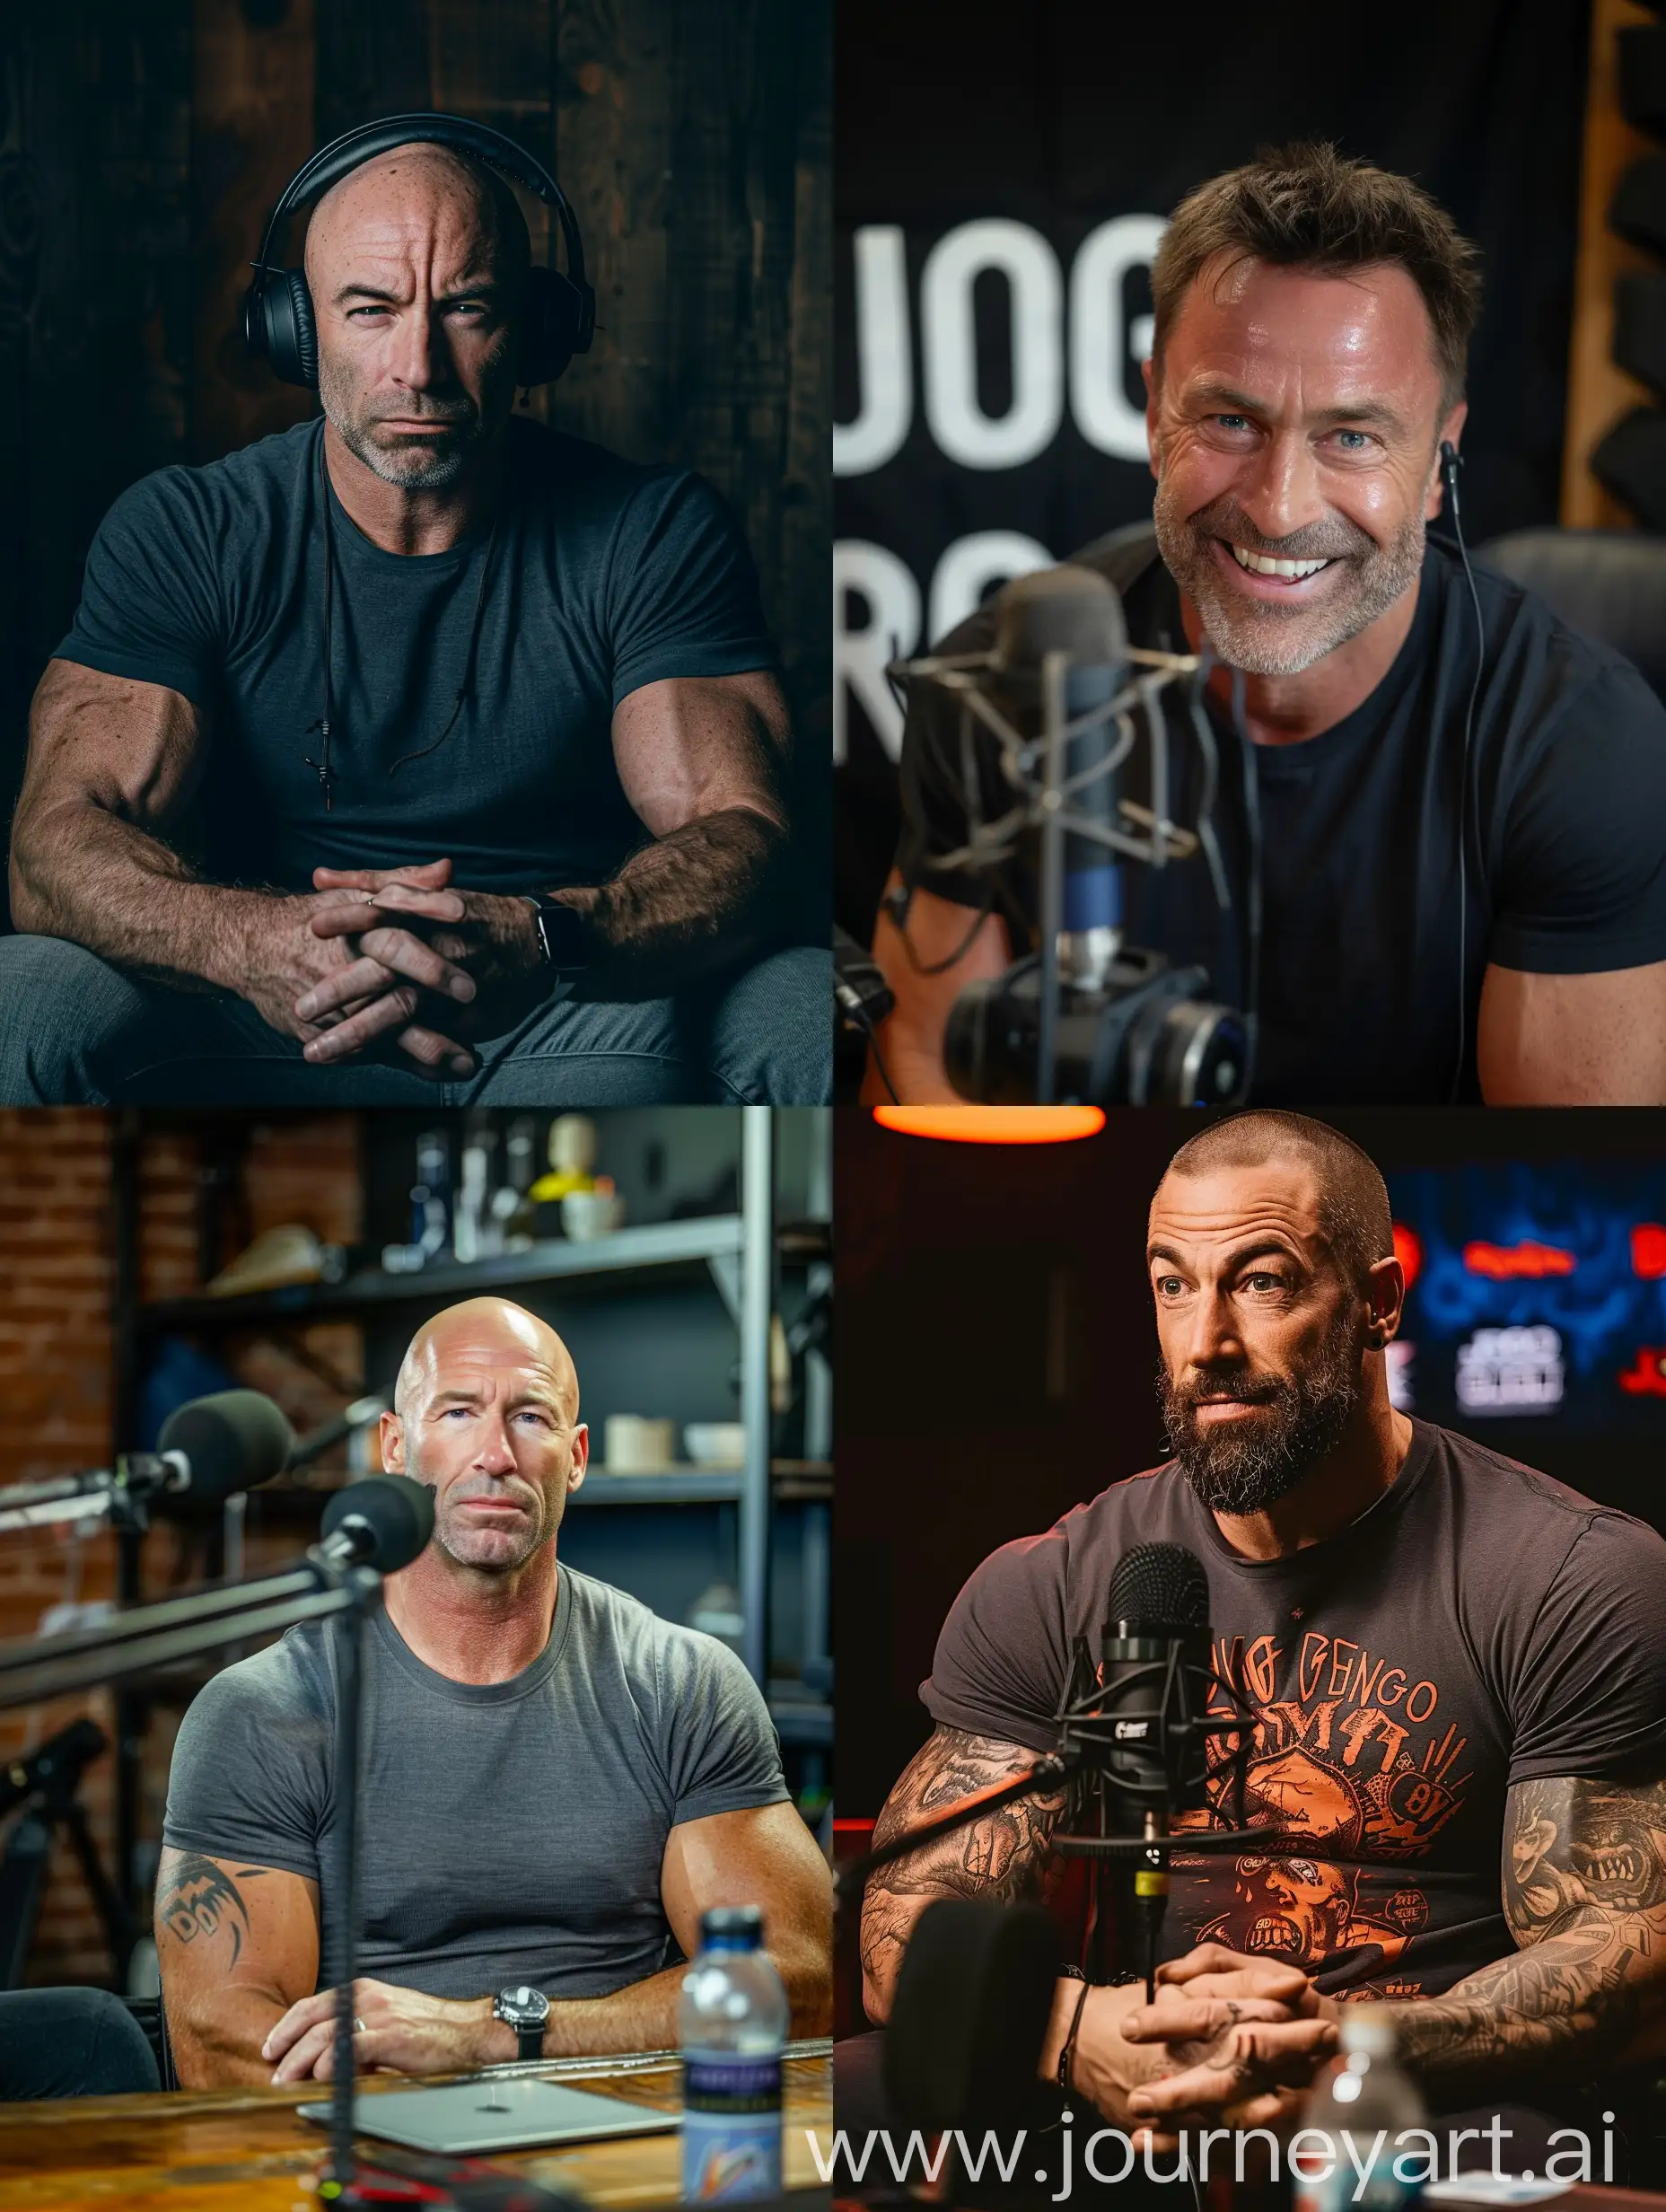 David-Goggins-Podcast-Interview-with-Joe-Rogan-Motivational-Discussion-on-Overcoming-Challenges